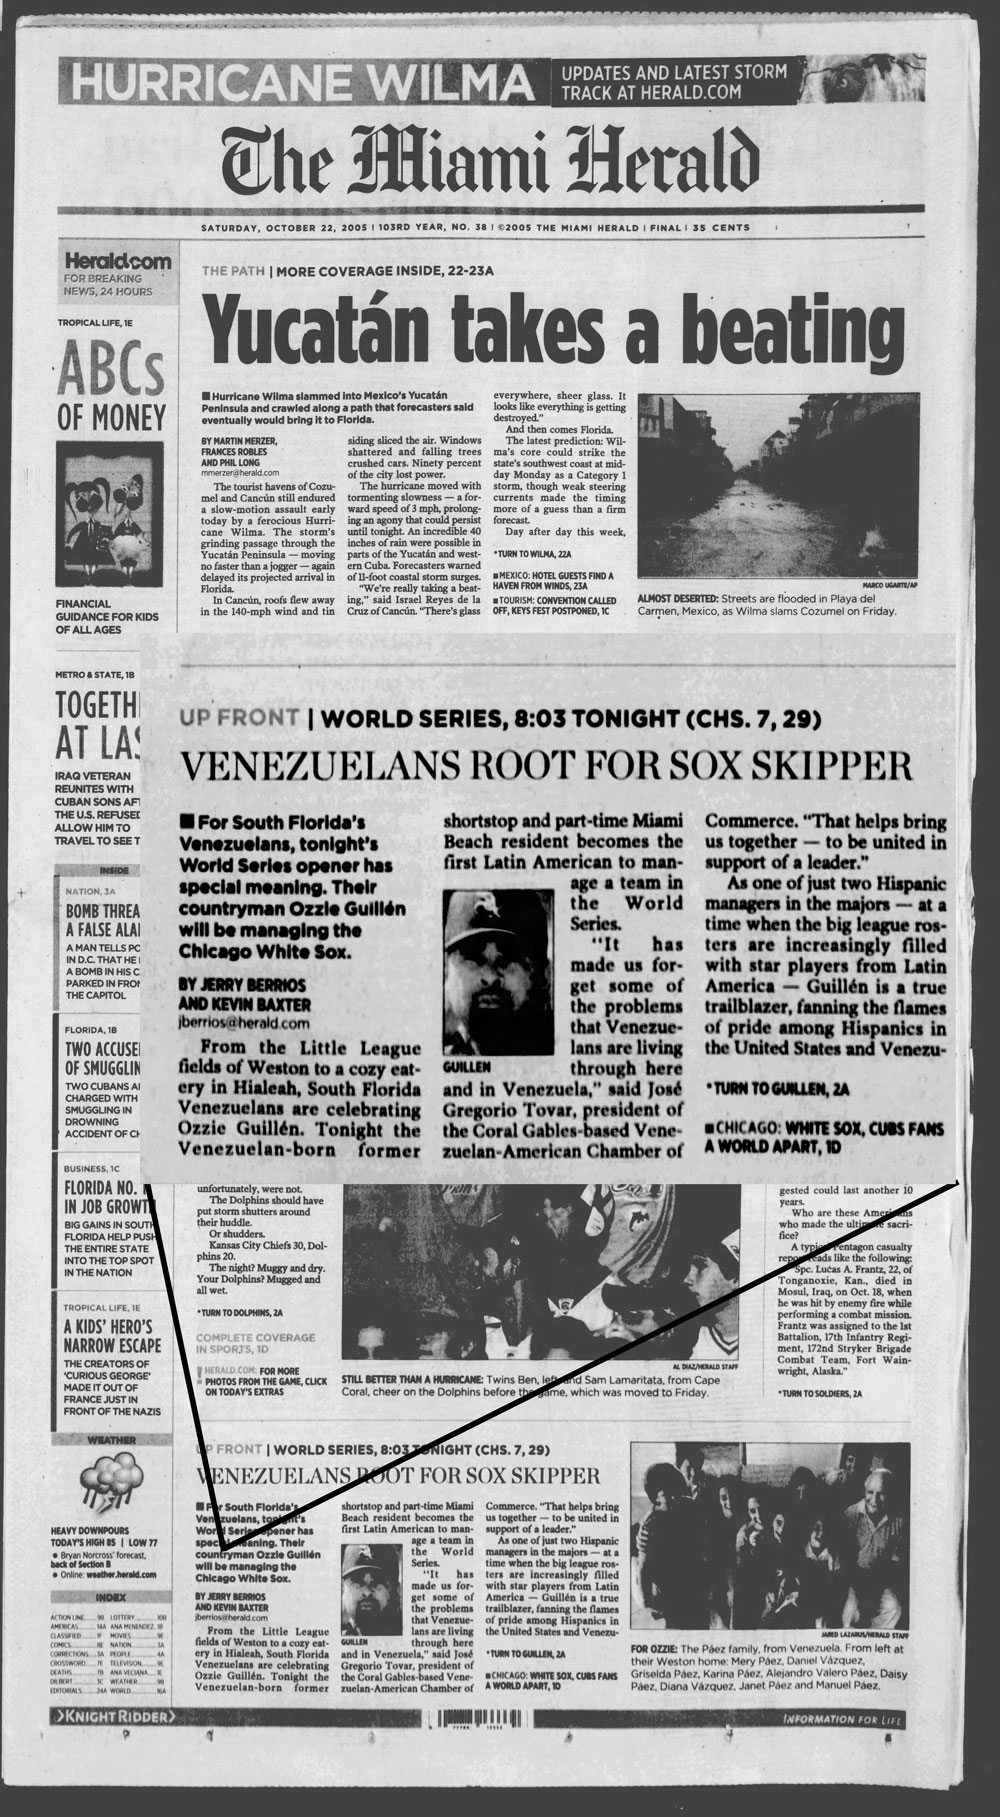 The front page of the Miami Herald as a faded background. In the foreground is the article that Kevin Baxter and Jerry Berrios worked on.